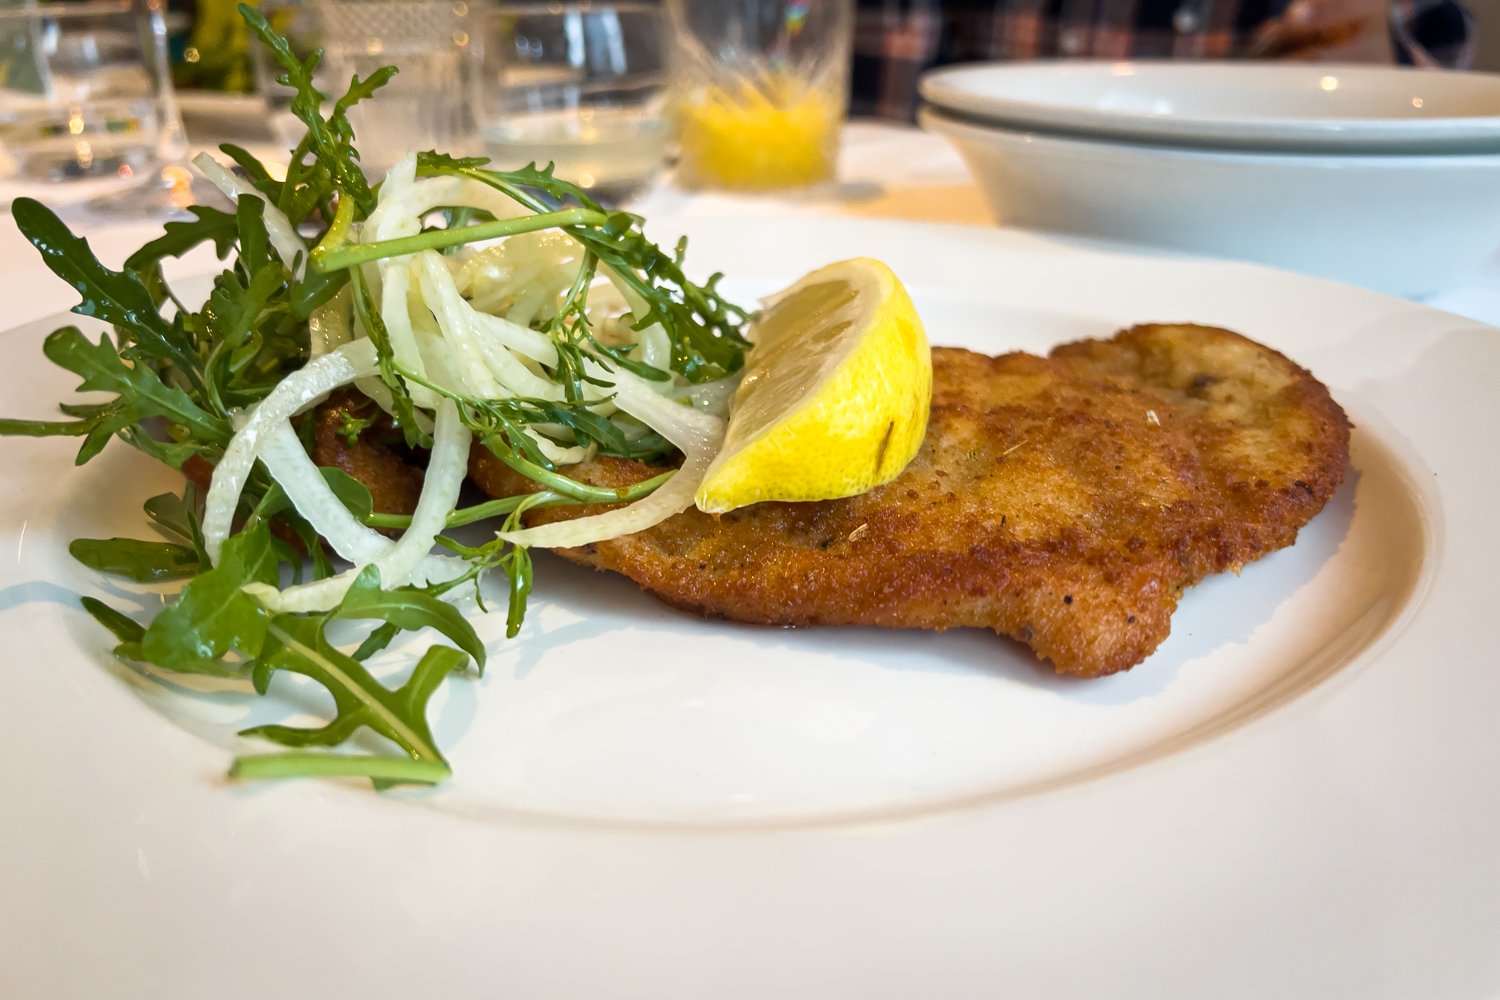  Pollo alla milanese: Not had this for awhile and, again, another decent take on this dish. 